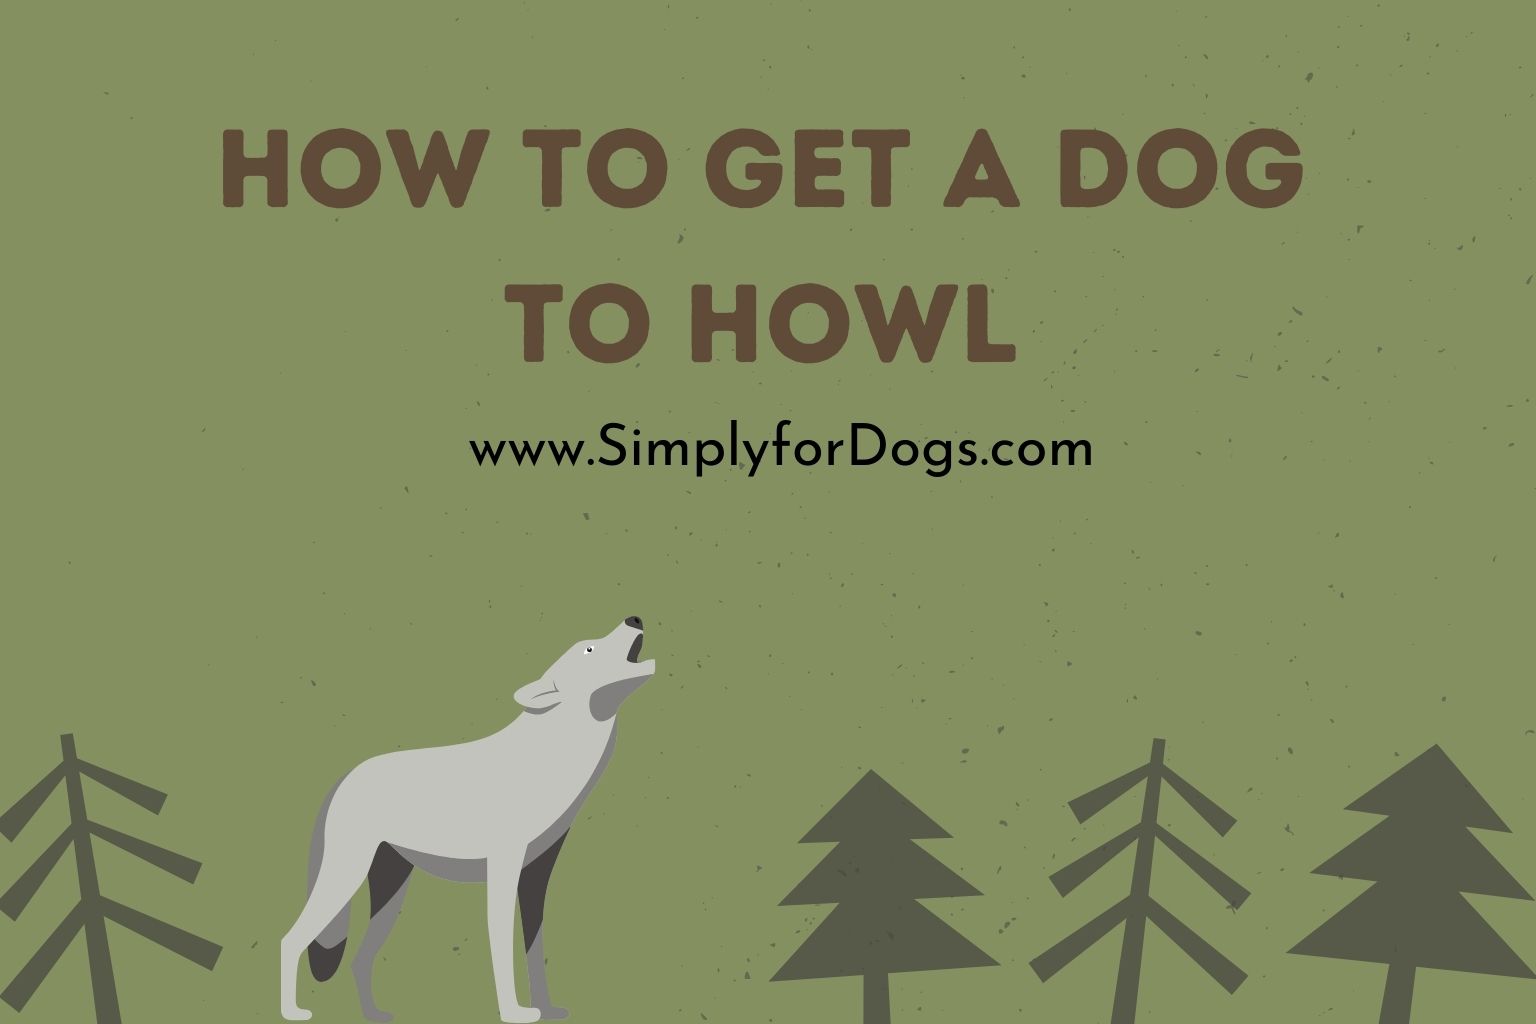 How to Get a Dog to Howl